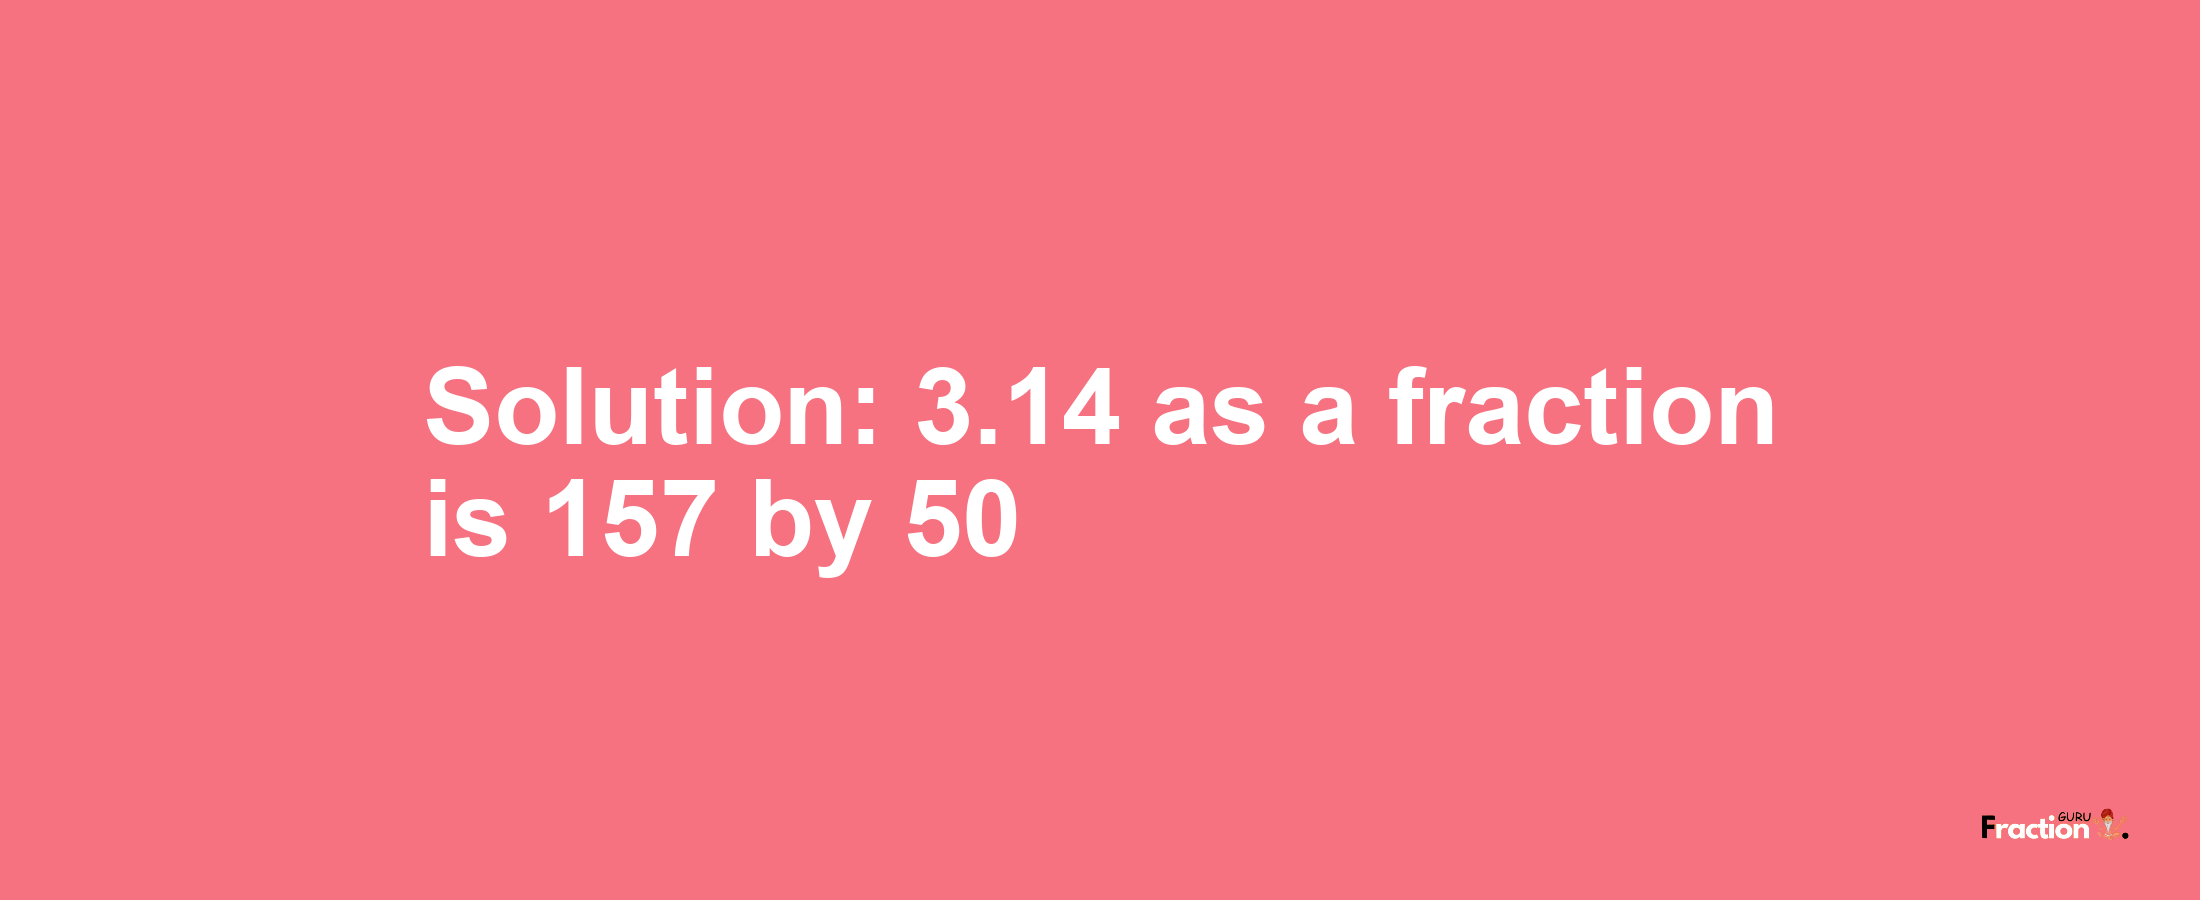 Solution:3.14 as a fraction is 157/50